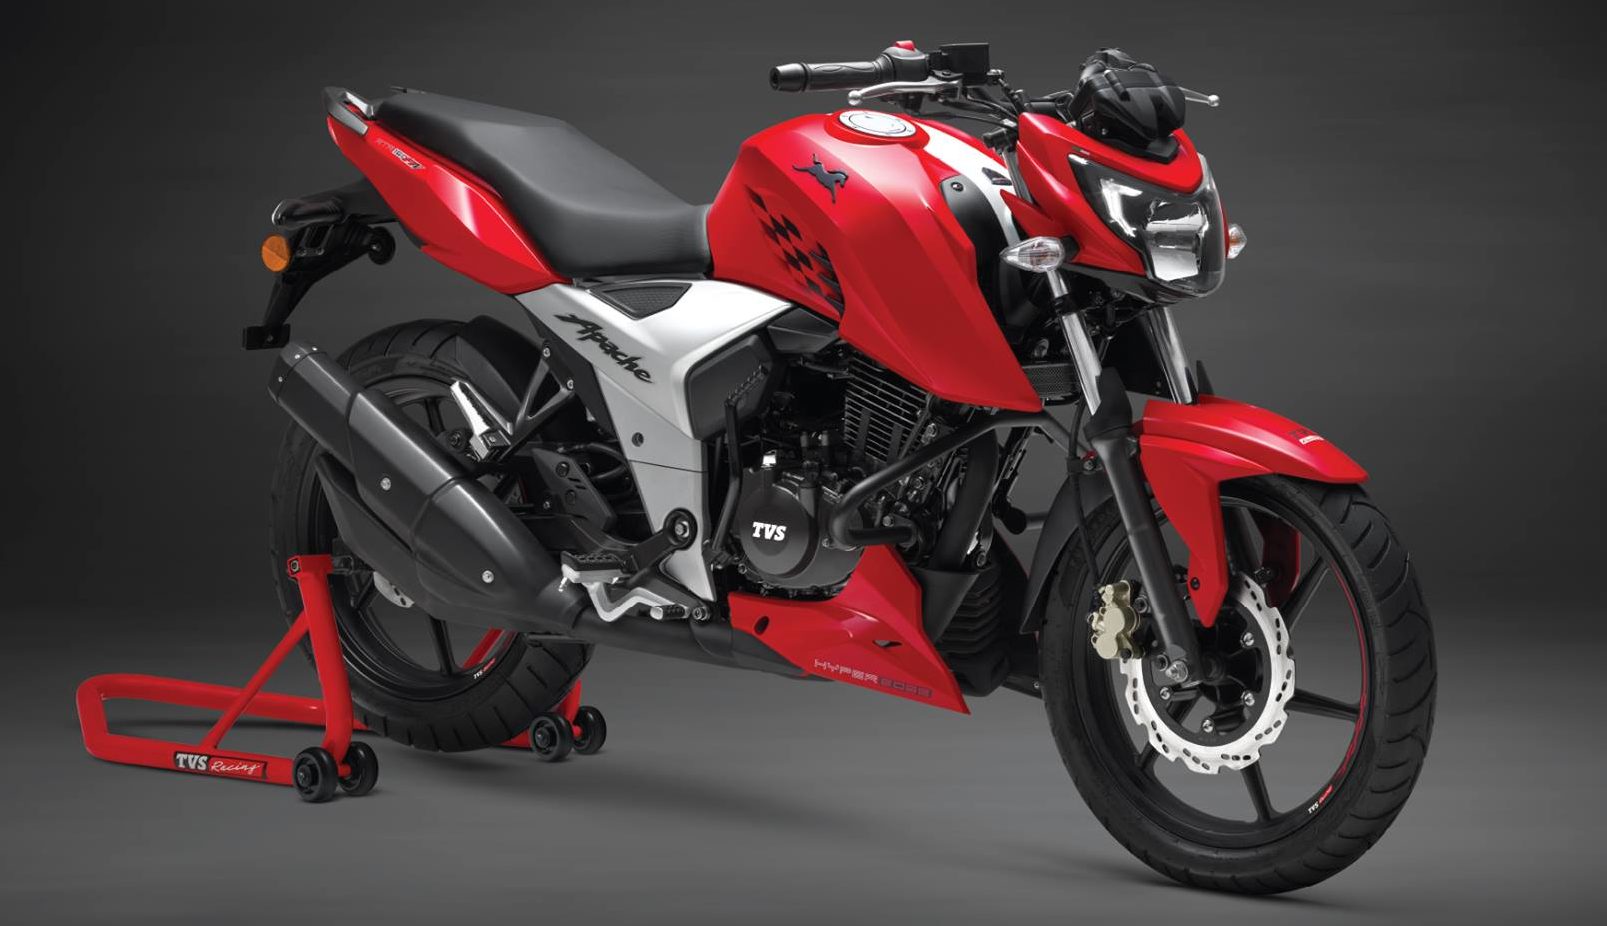 Official New Tvs Apache Rtr 160 Launched In India Prices Start